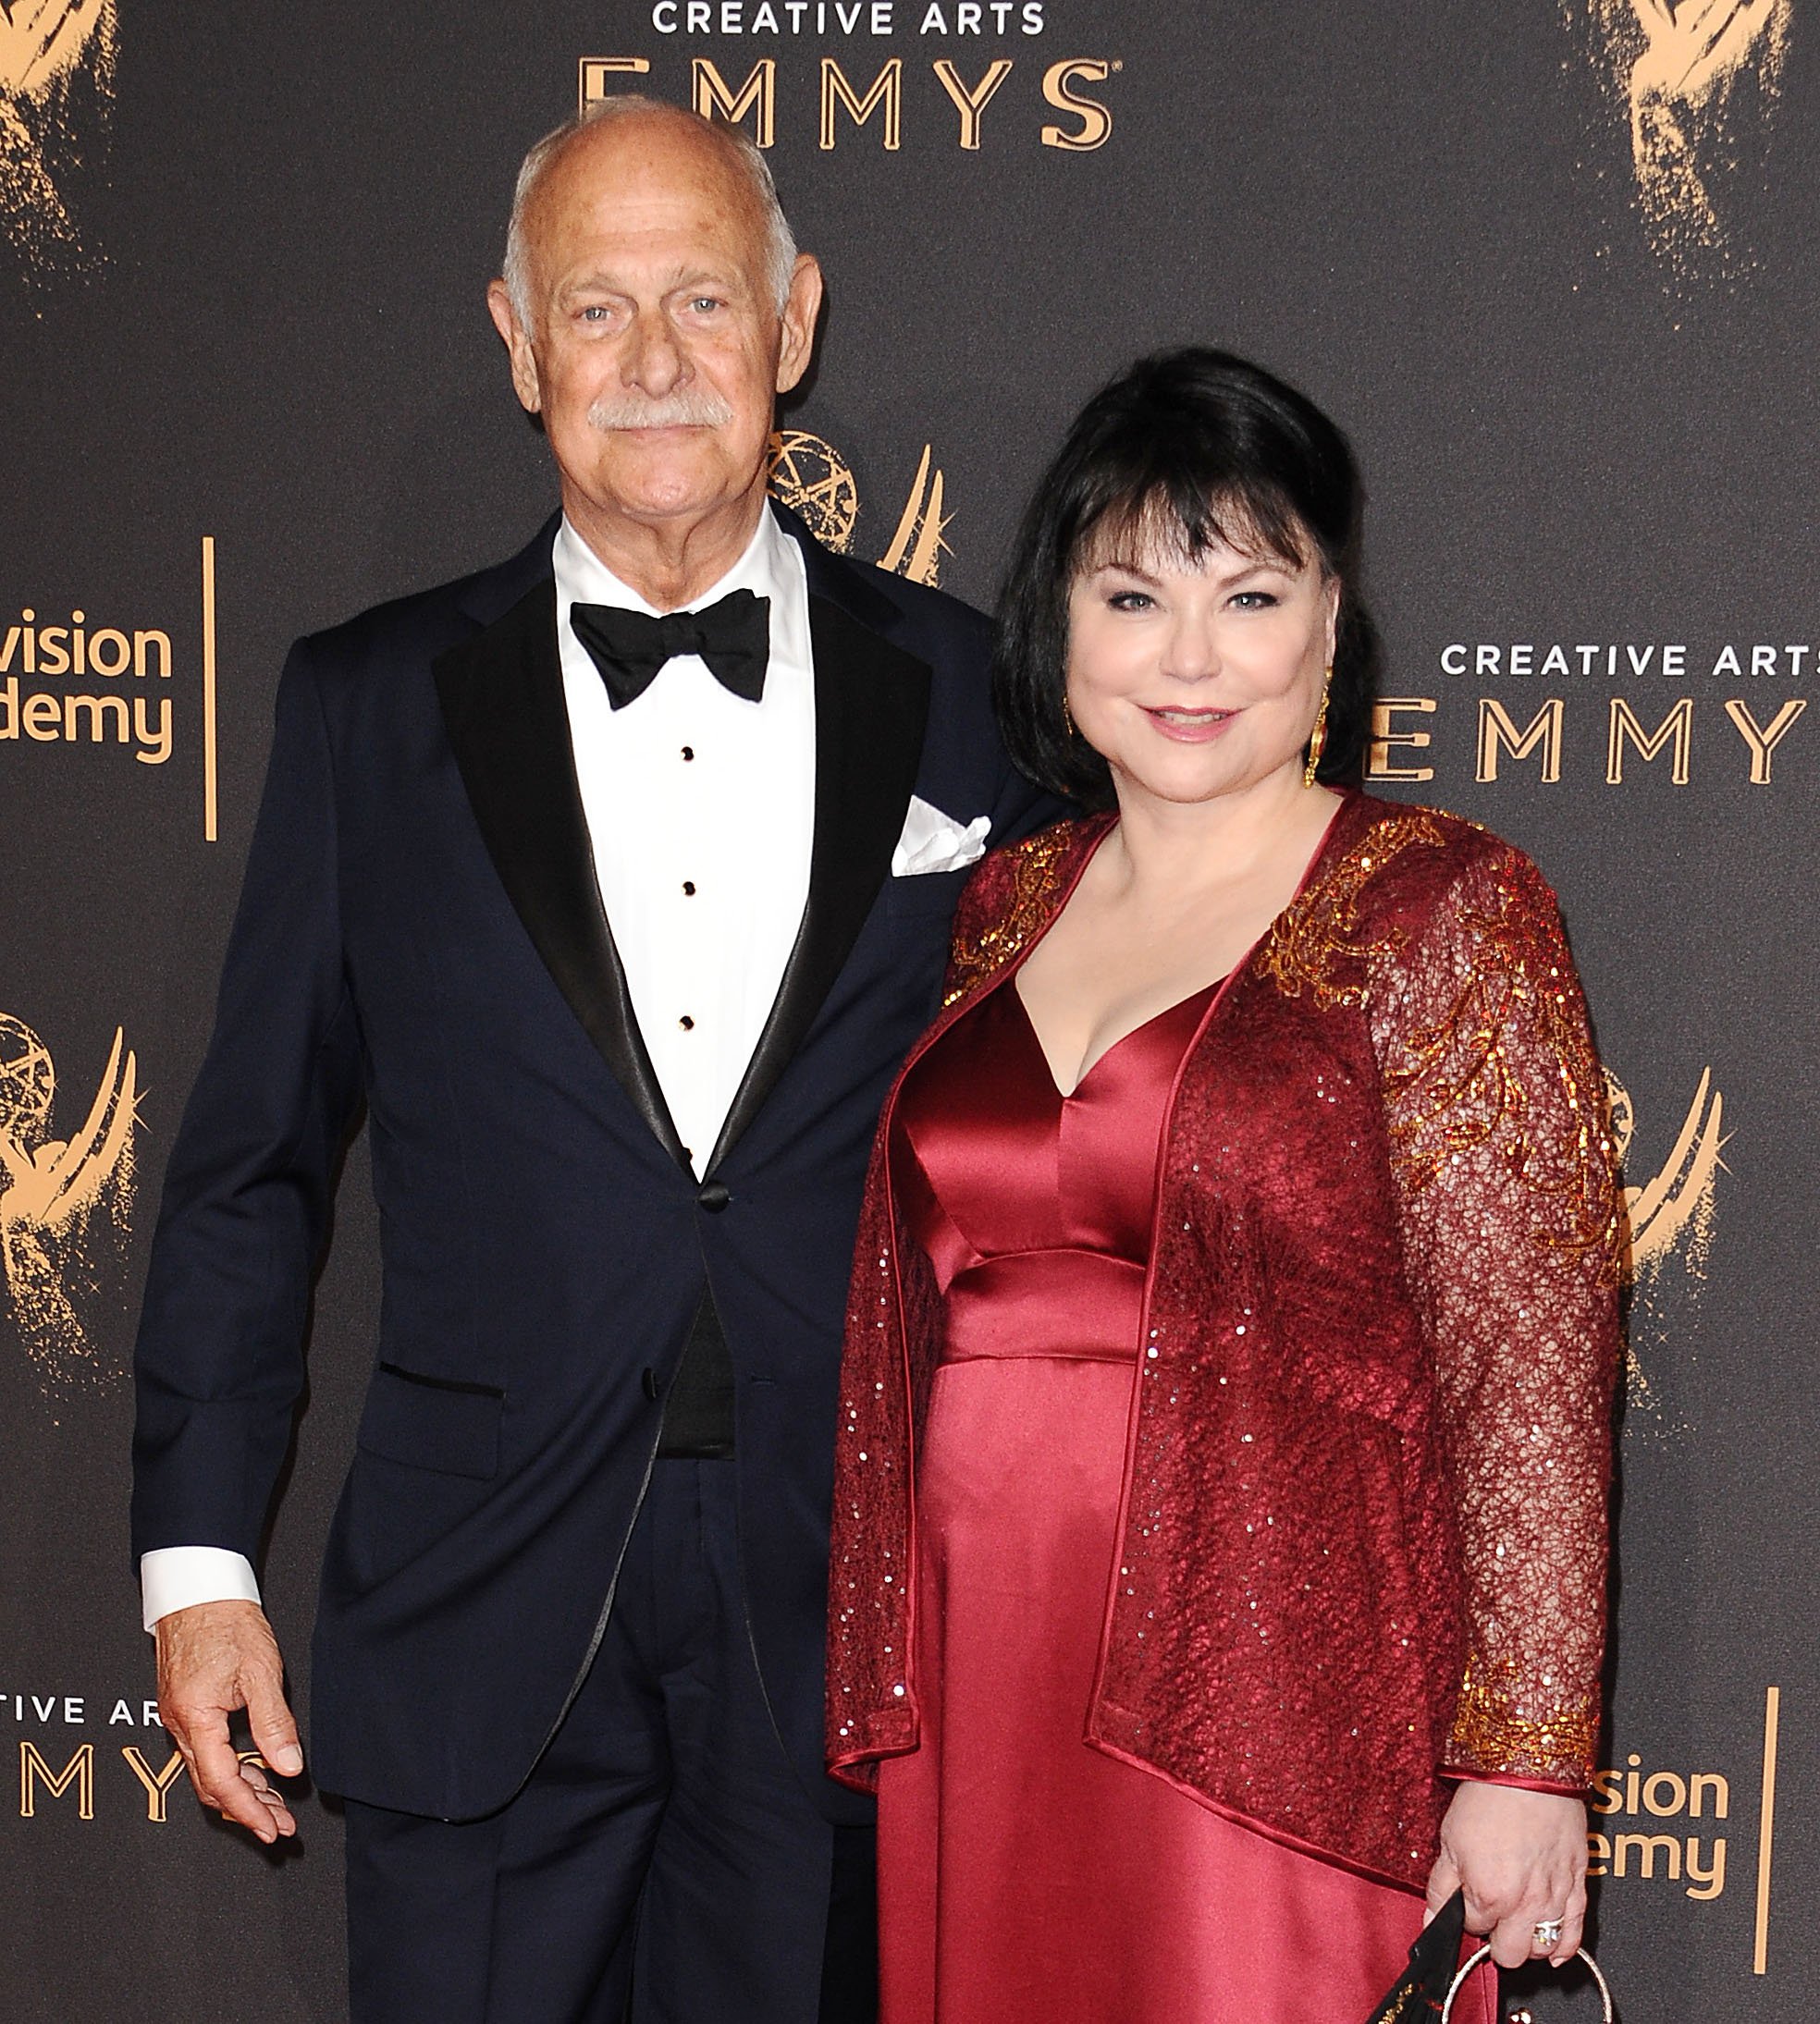 Gerald McRaney and Delta Burke at the 2017 Creative Arts Emmy Awards on September 10, 2017, in Los Angeles | Source: Getty Images